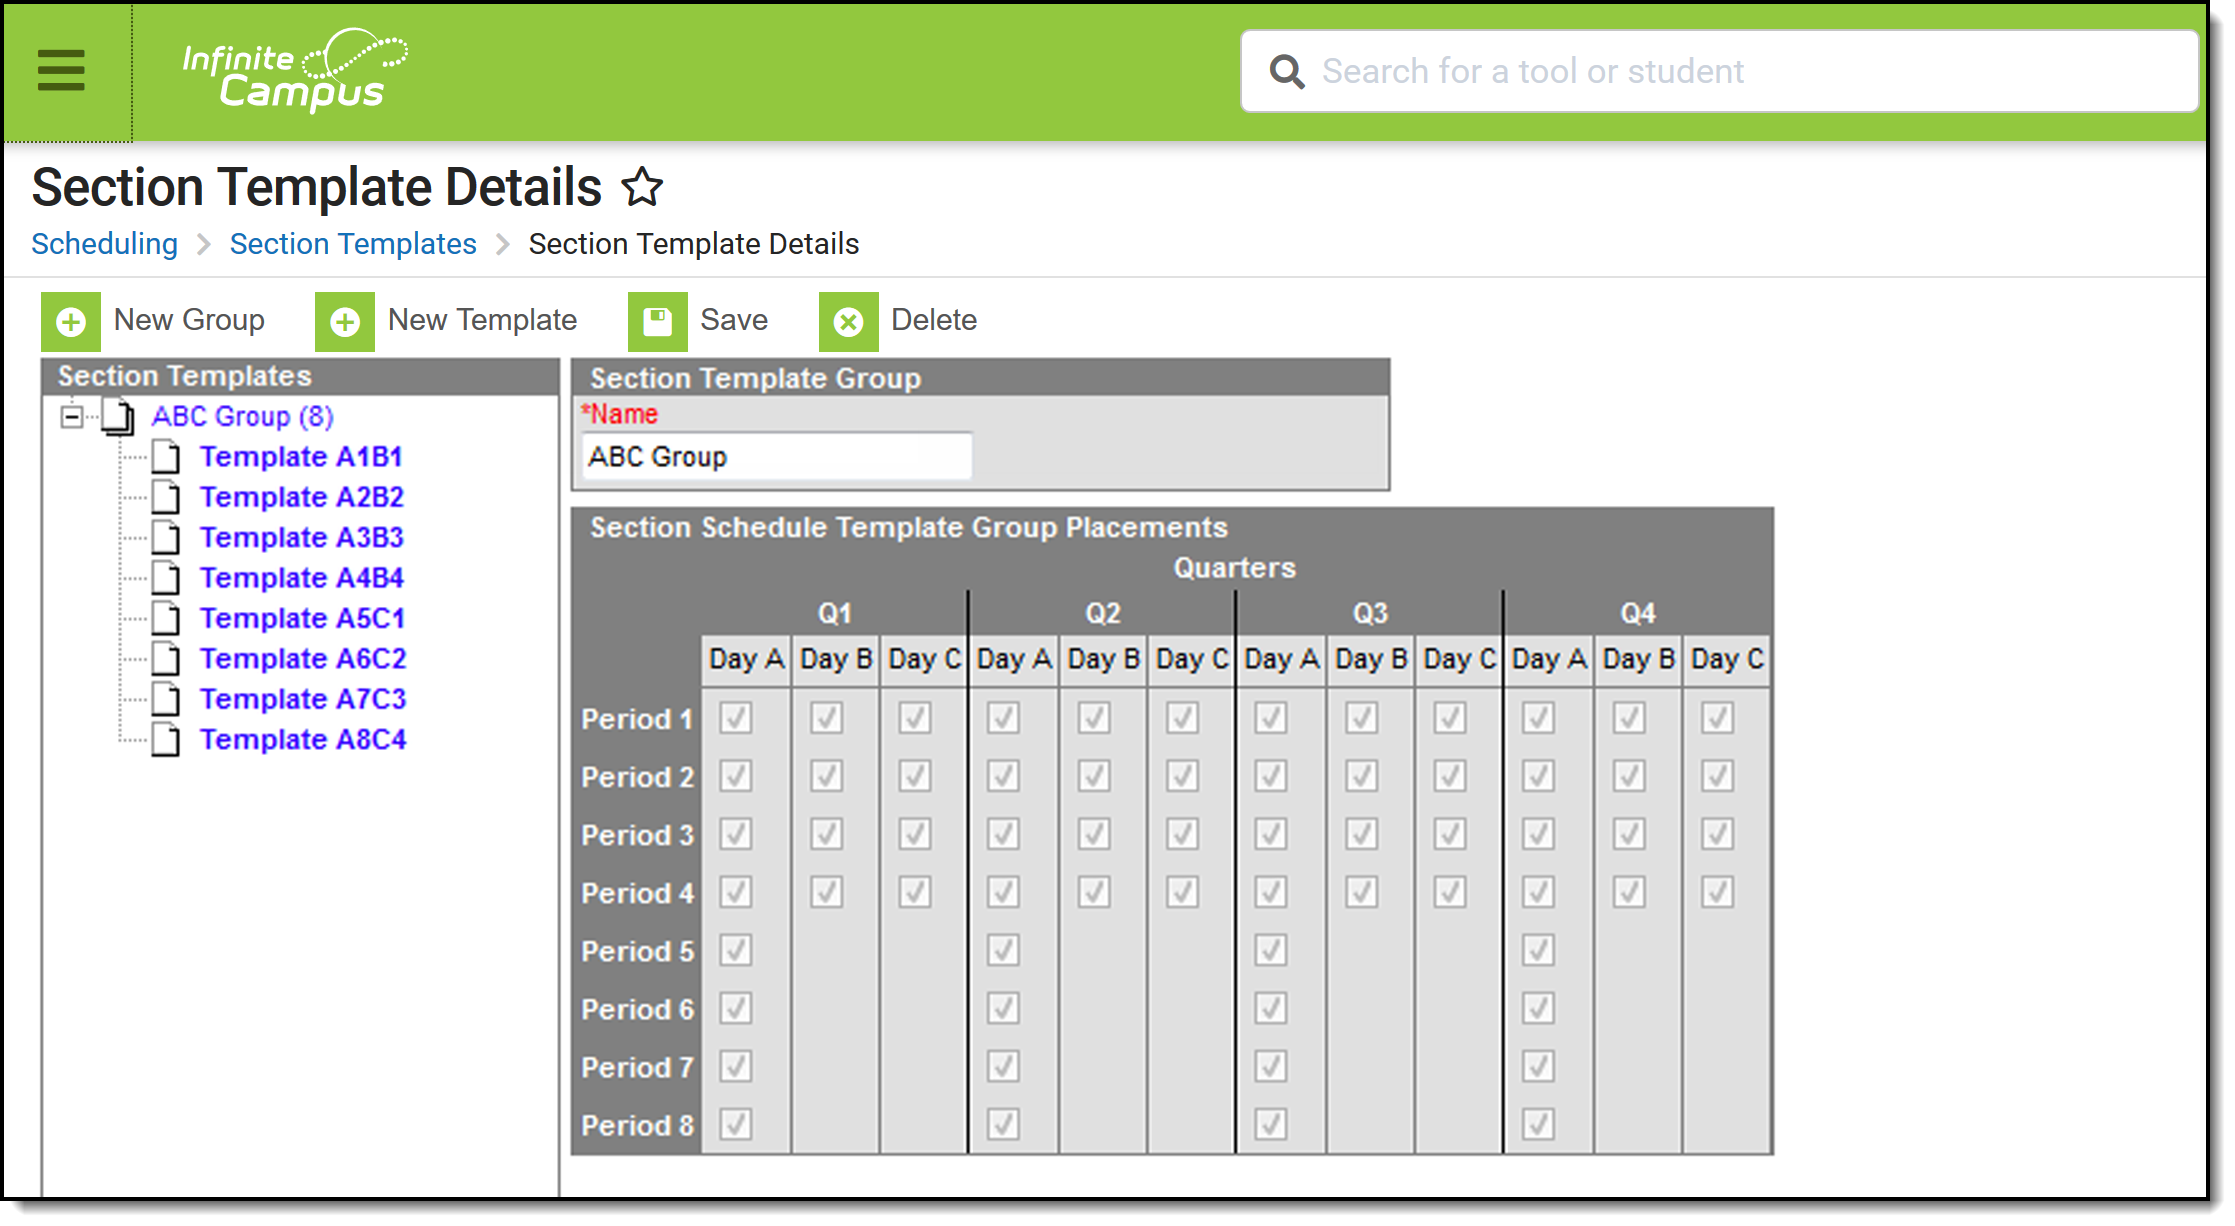 Screenshot of the Section Template Details tool.